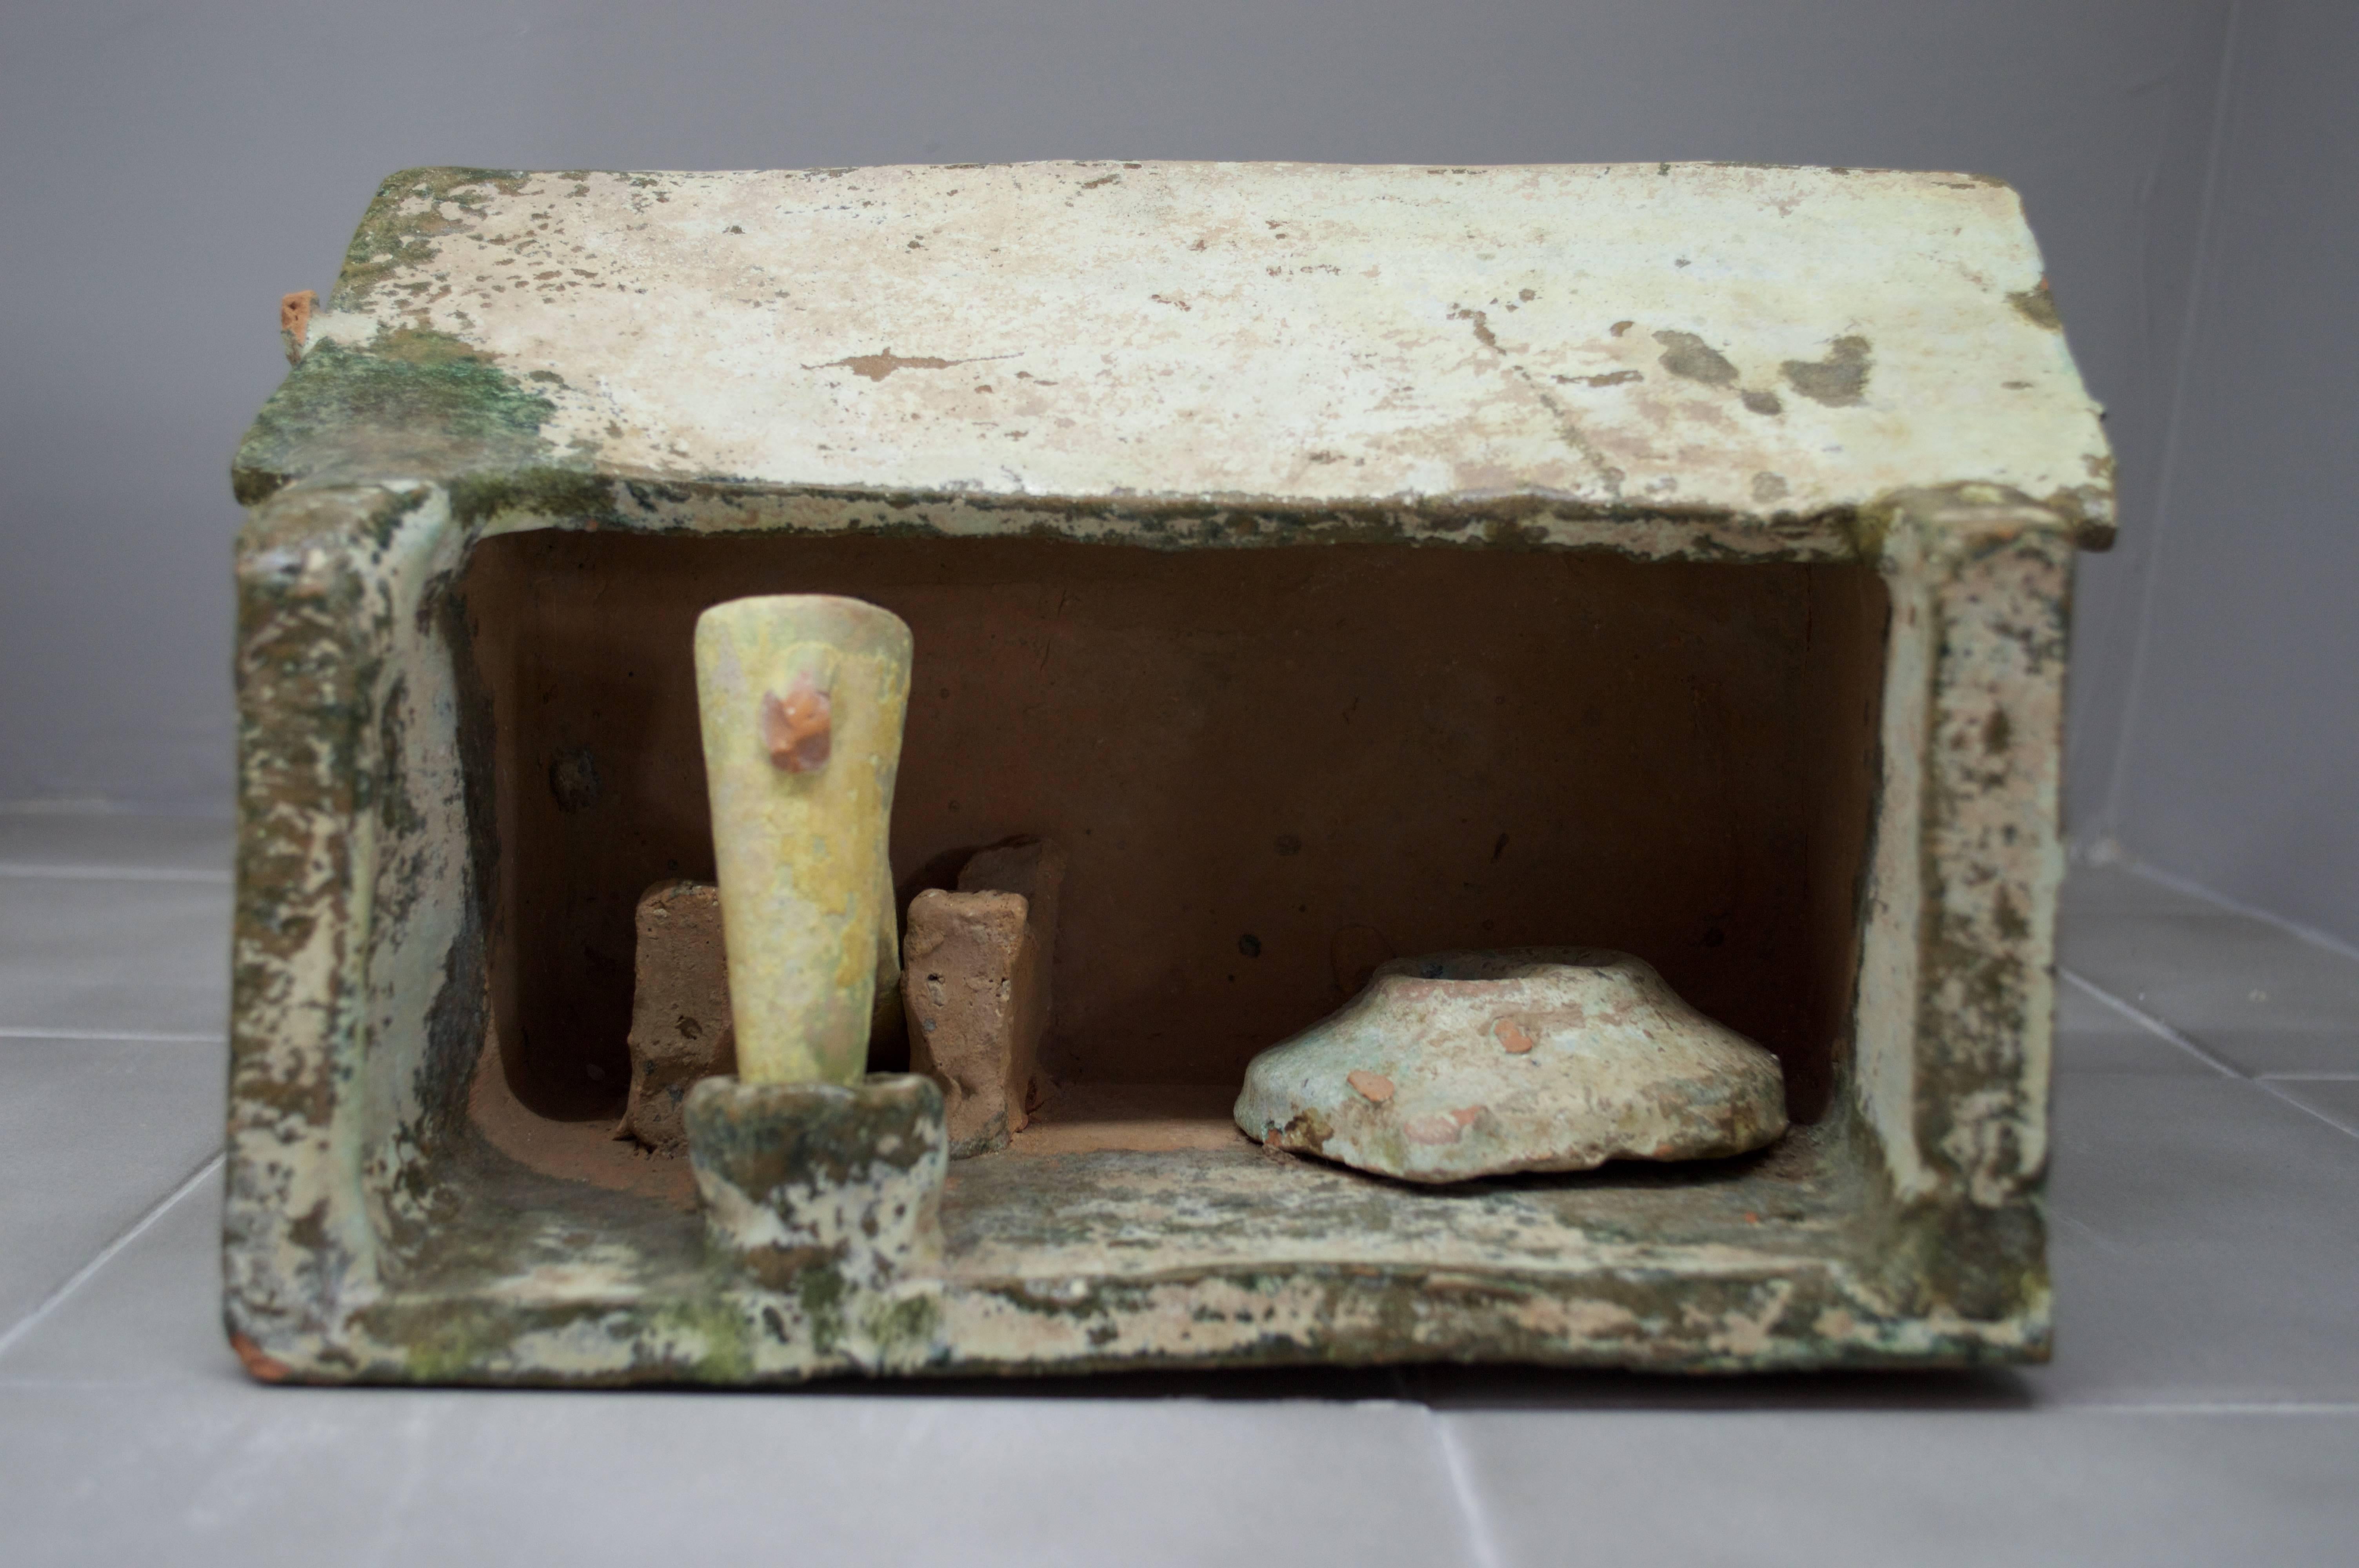 Slab pottery constructed Model of a Paper Mill, in Green and Cream Color Glazed Terracotta having a peaked roof – open walled form with a mechanical pounder and a large round storage container. Light blue-green mottled glazed surface with some